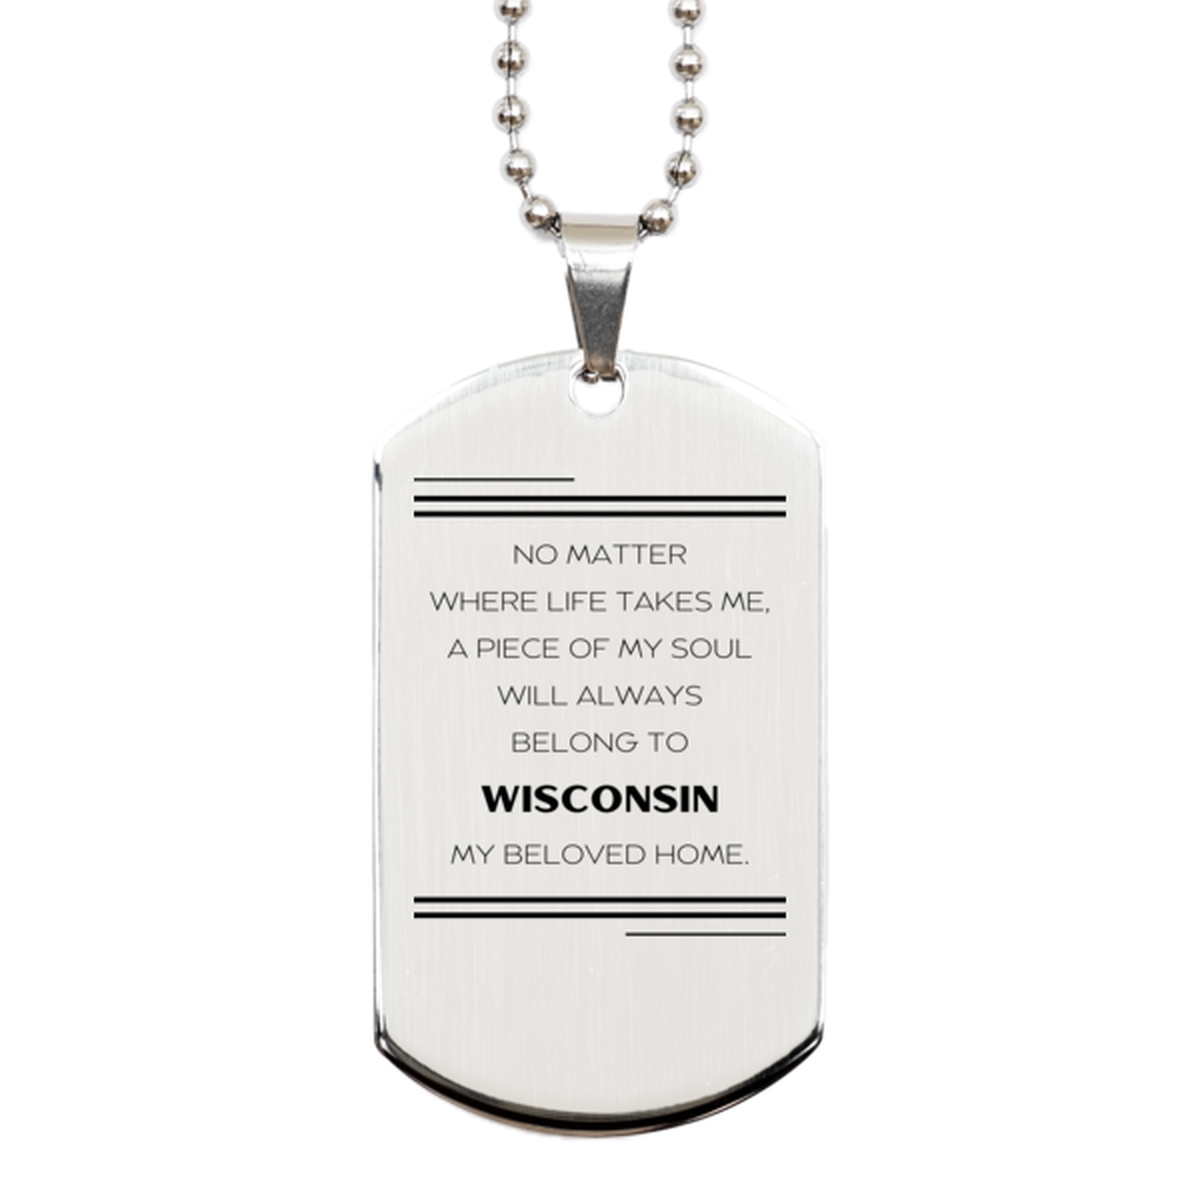 Love Wisconsin State Gifts, My soul will always belong to Wisconsin, Proud Silver Dog Tag, Birthday Unique Gifts For Wisconsin Men, Women, Friends